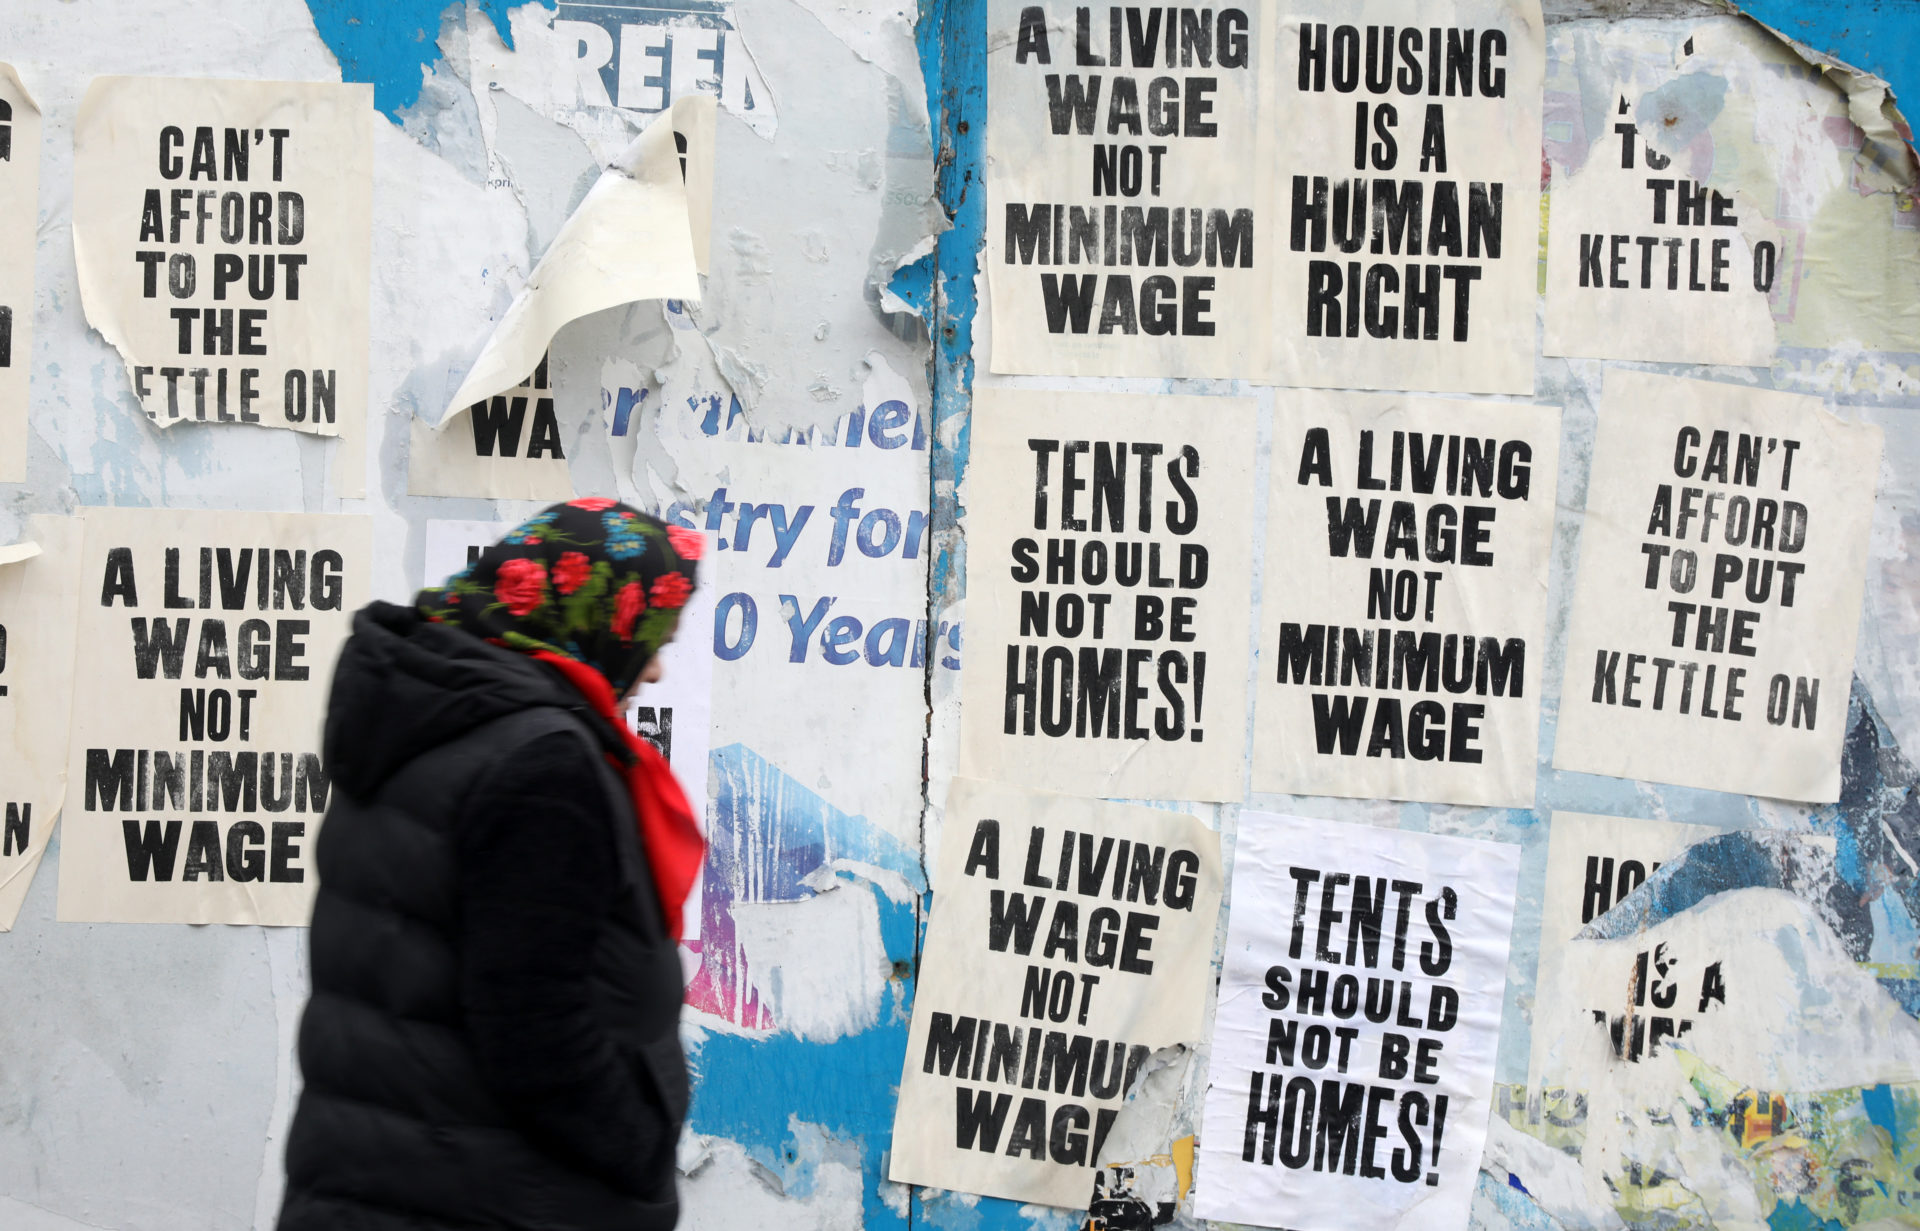 A woman walks past a billboard with posters protesting homelessness on Bow Lane, West Dublin